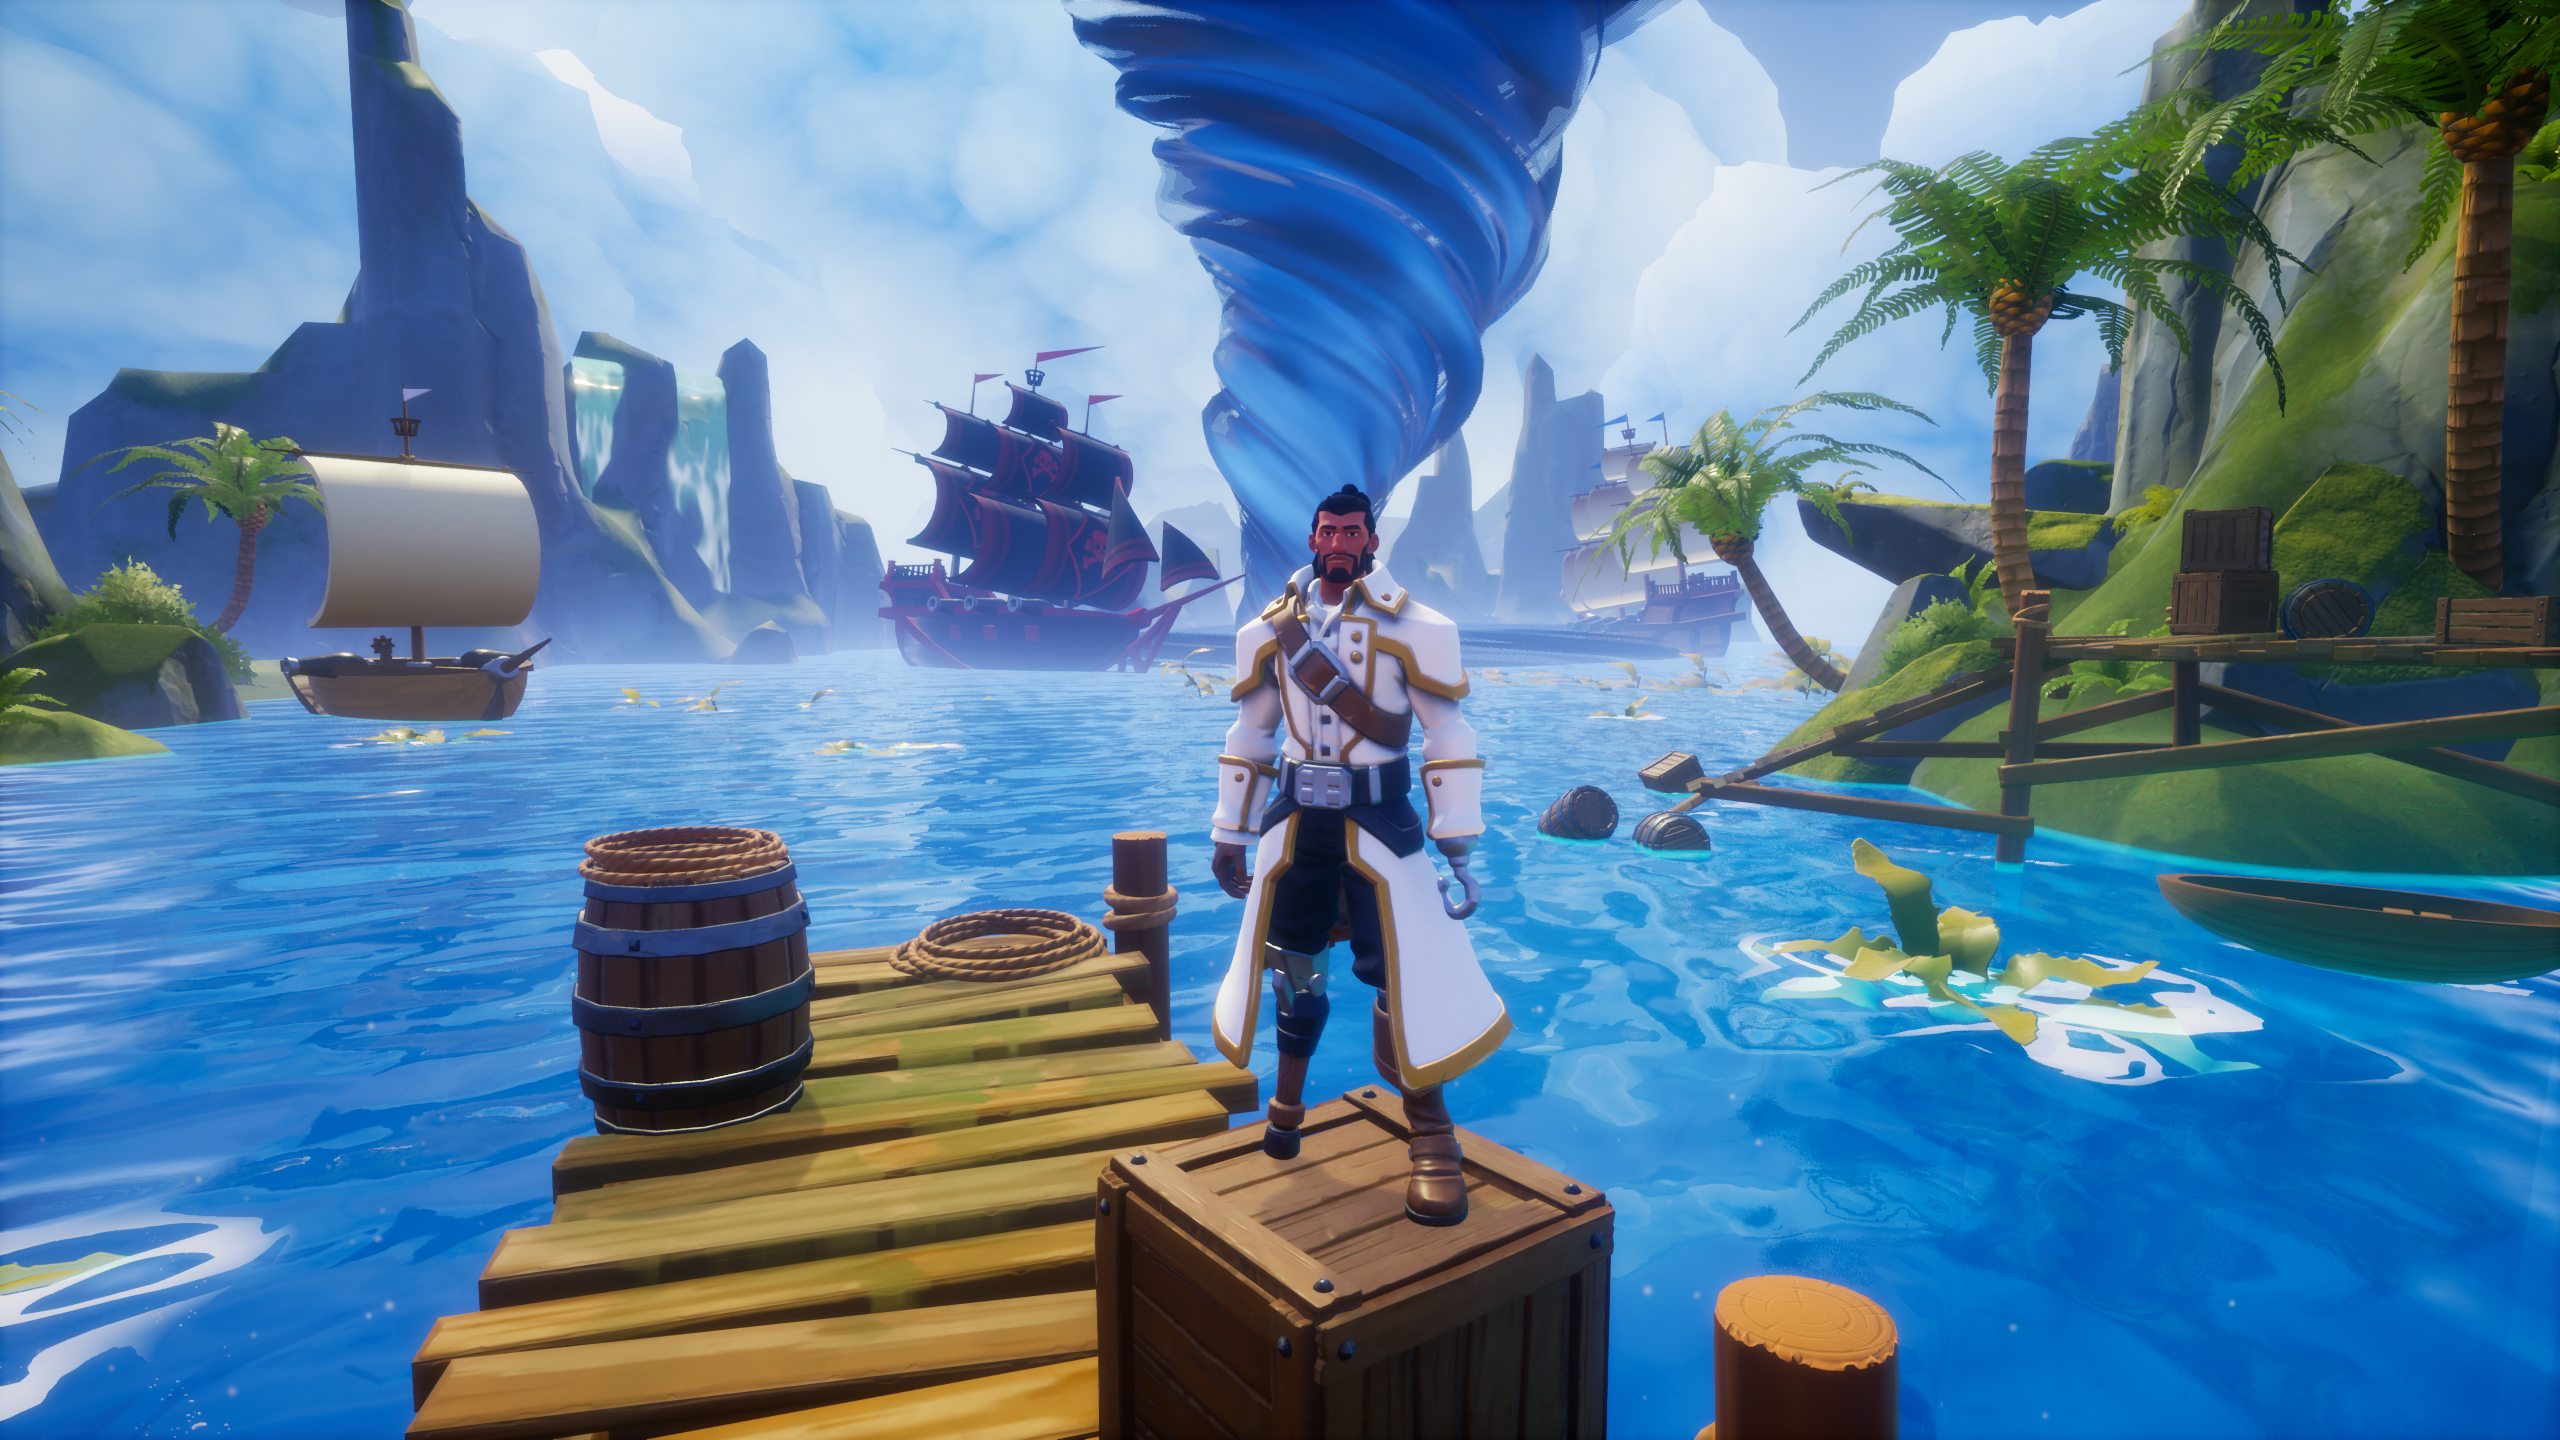 Core Game Engine Review: Online Pirate